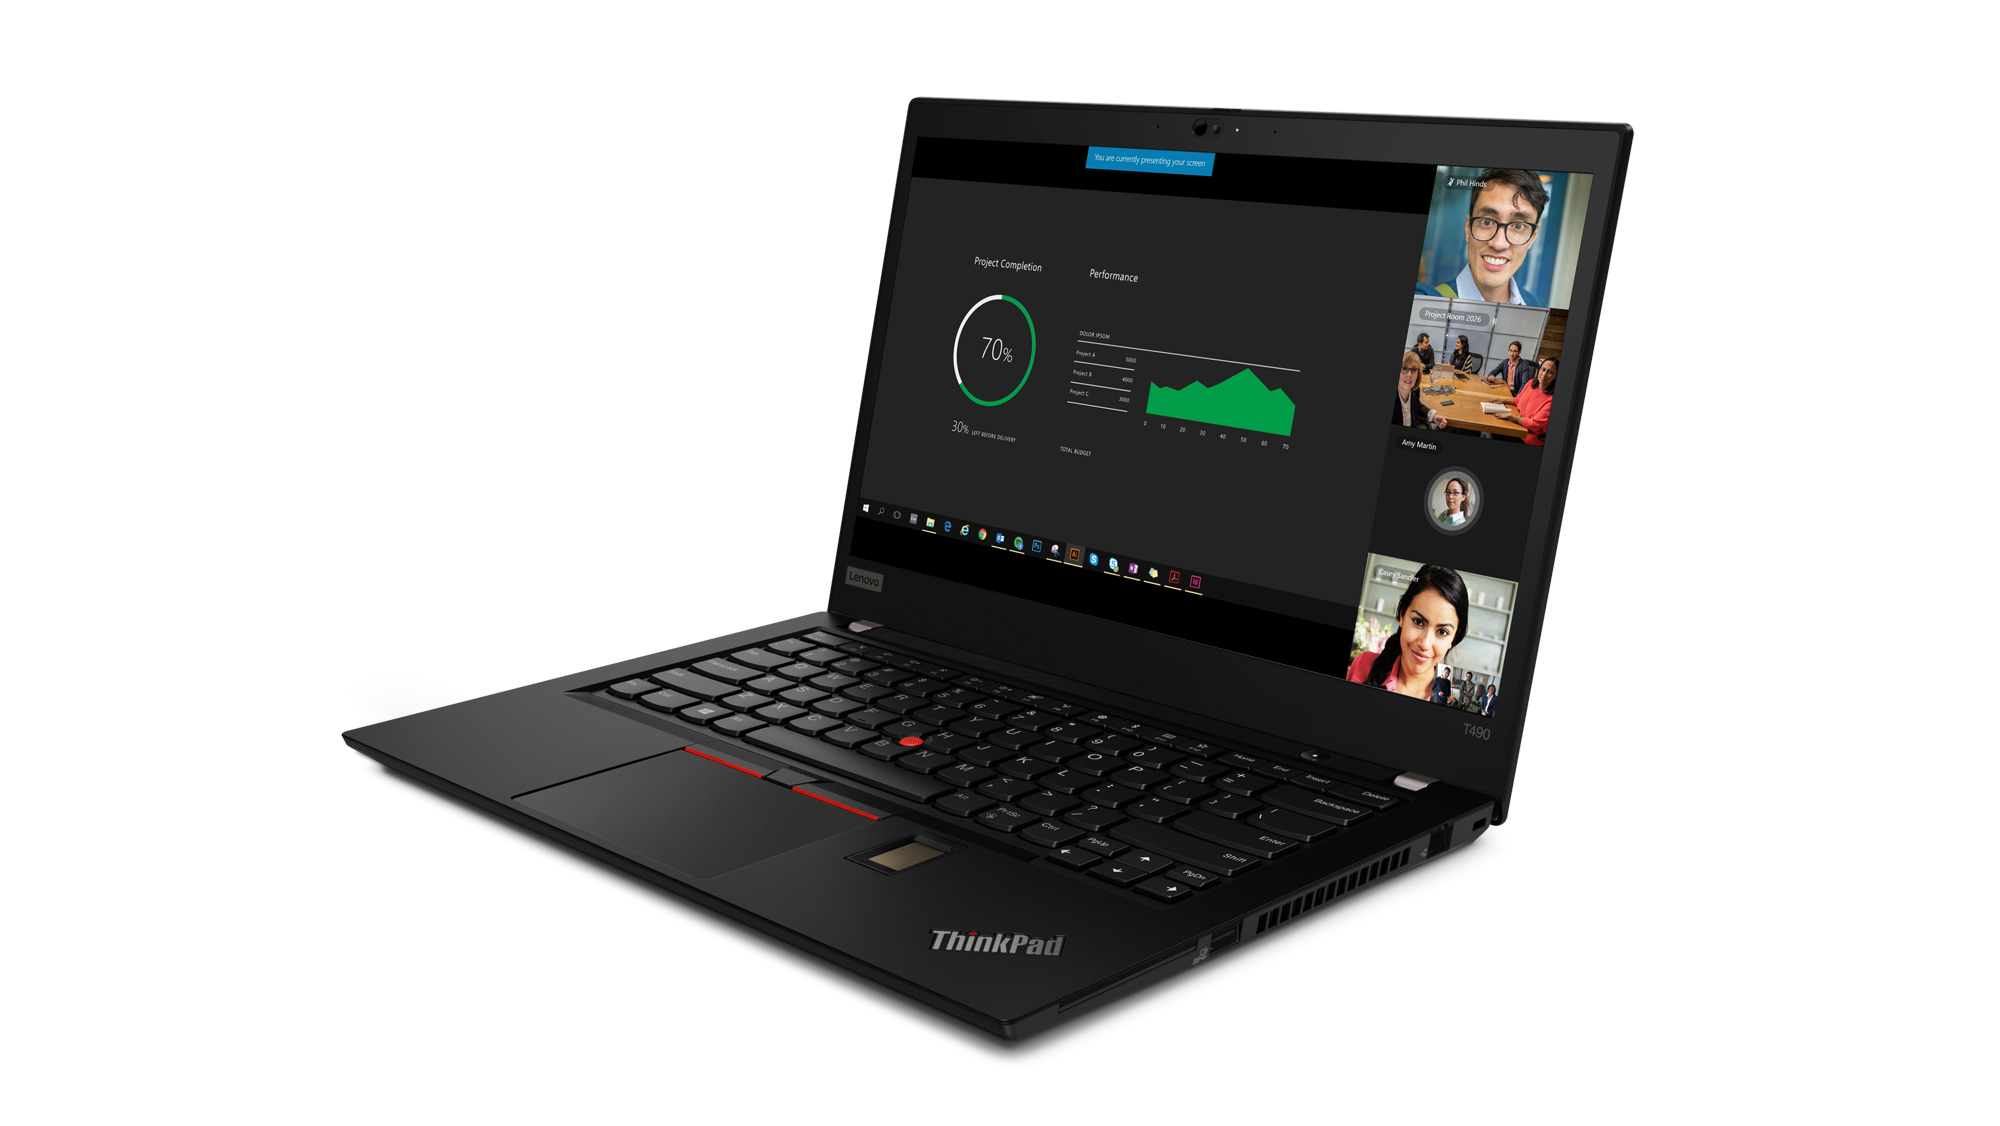 lenovo annouces new thinkpads with 10th gen cometlake thinkpad t490 7